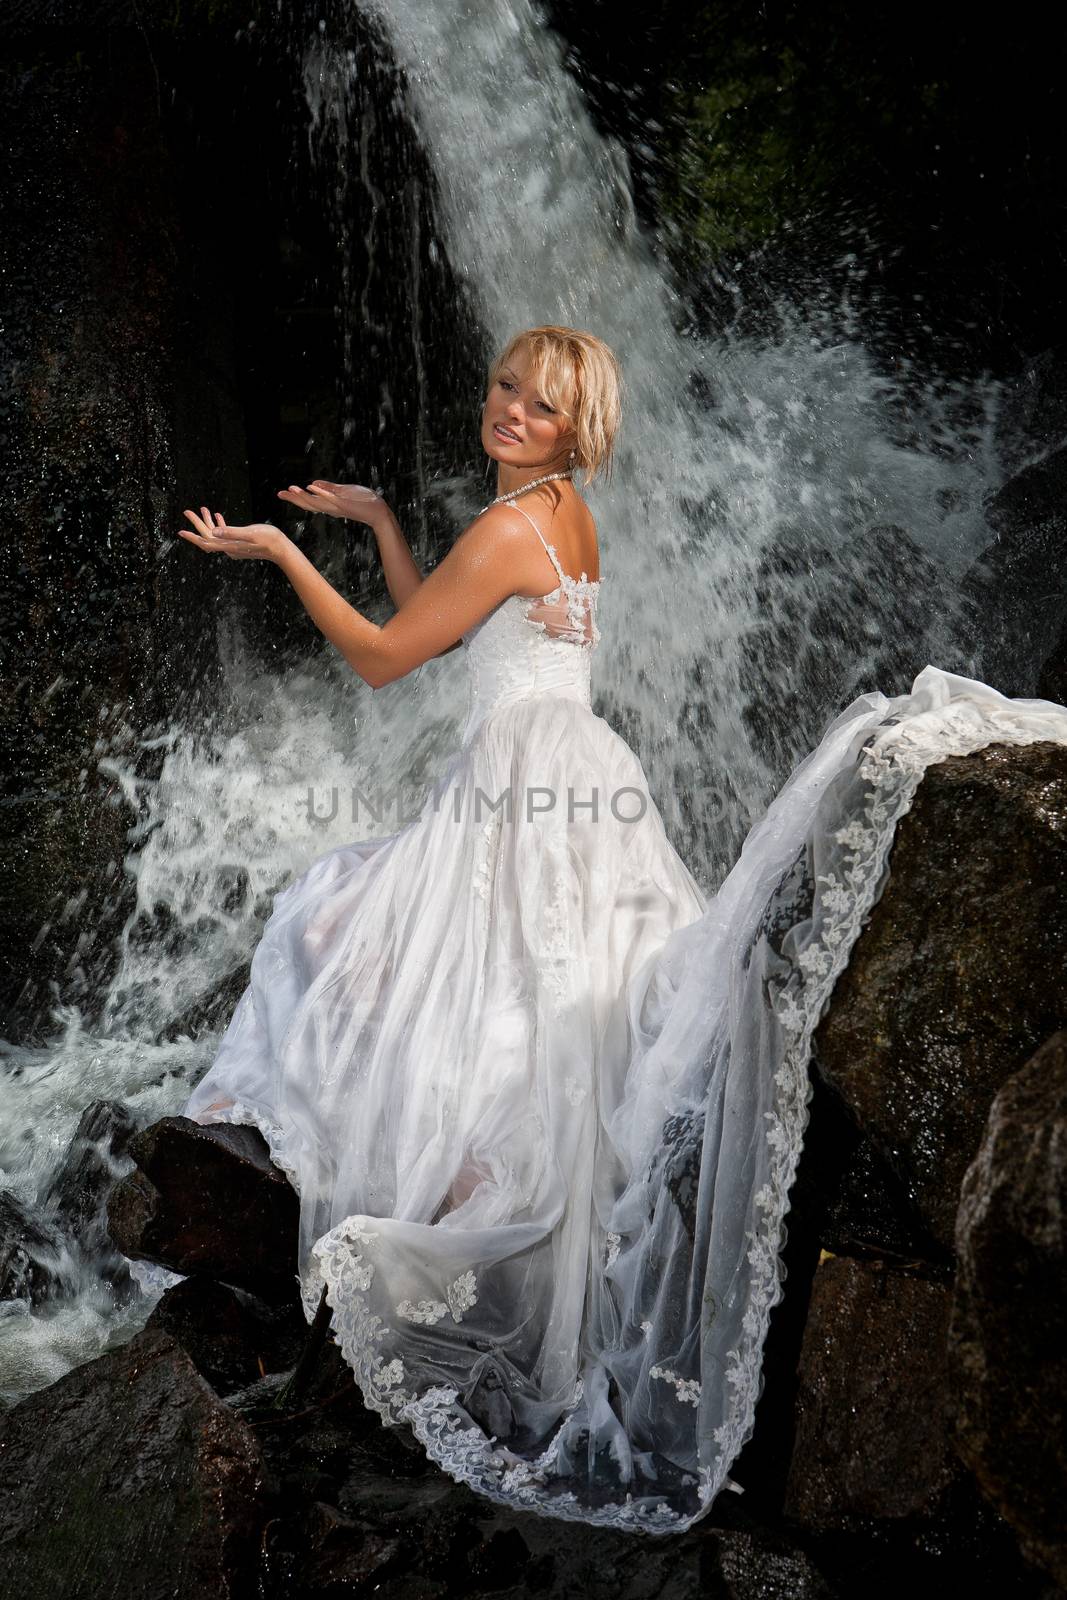 Young Bride On A River by Fotoskat